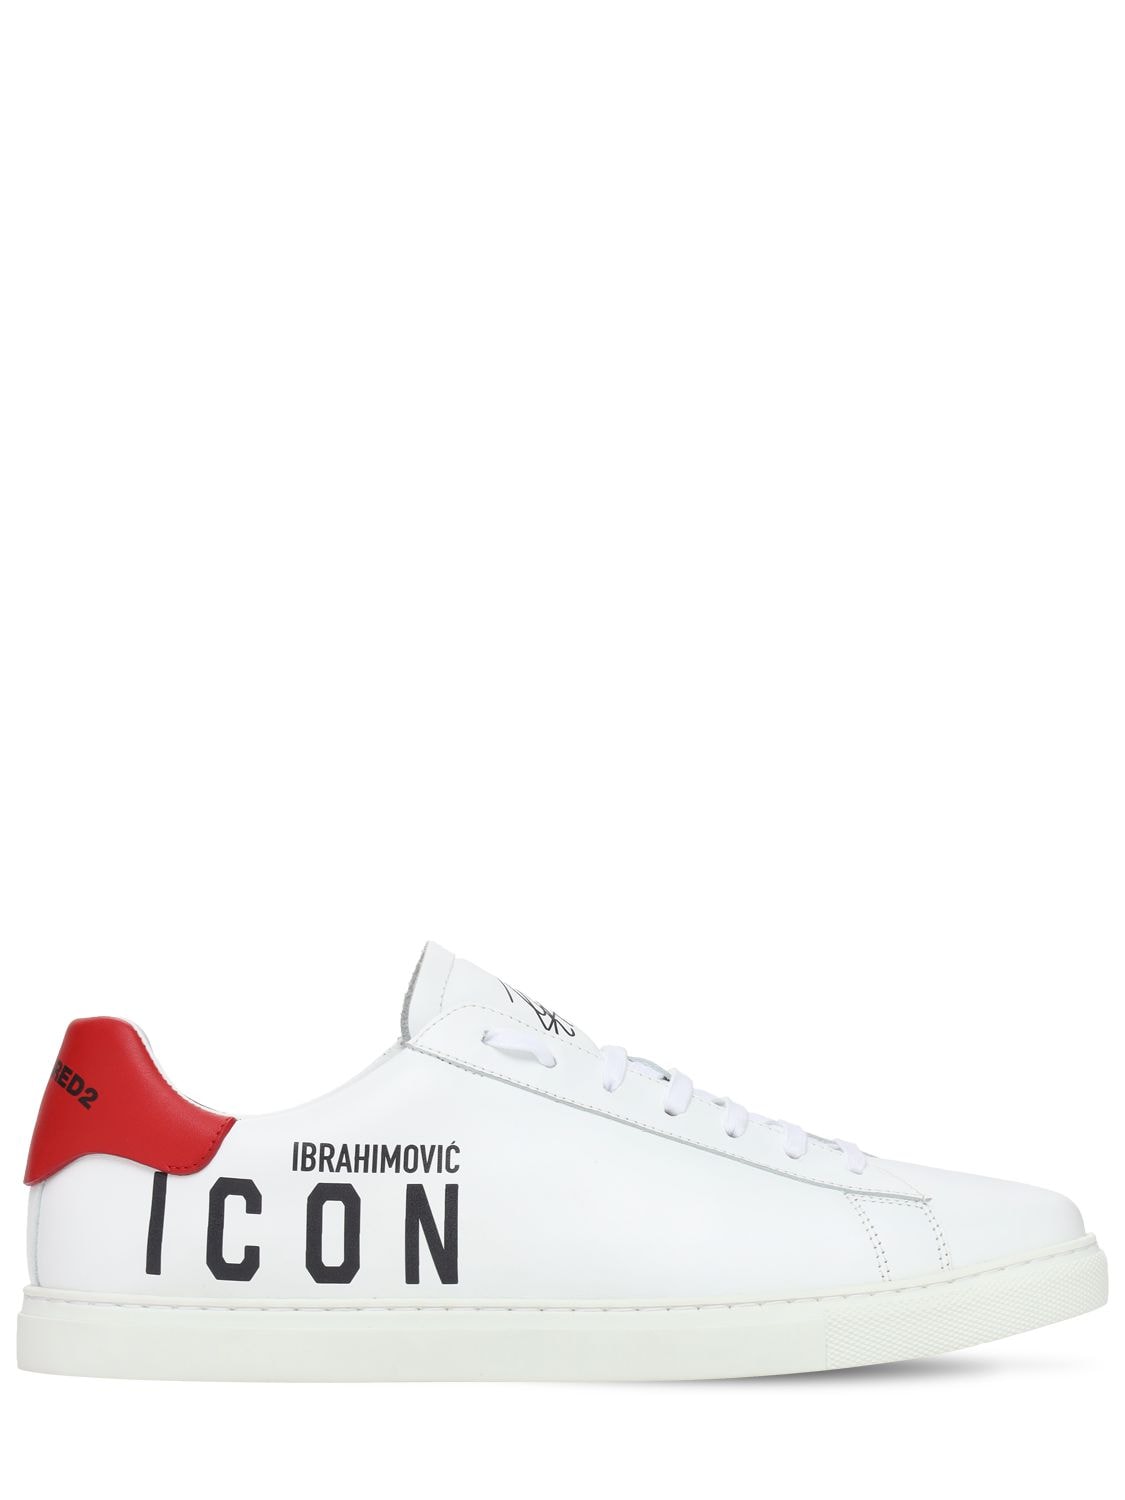 DSQUARED2 NEW TENNIS IBRA ICON LEATHER trainers,73IS3D003-TTUZNG2